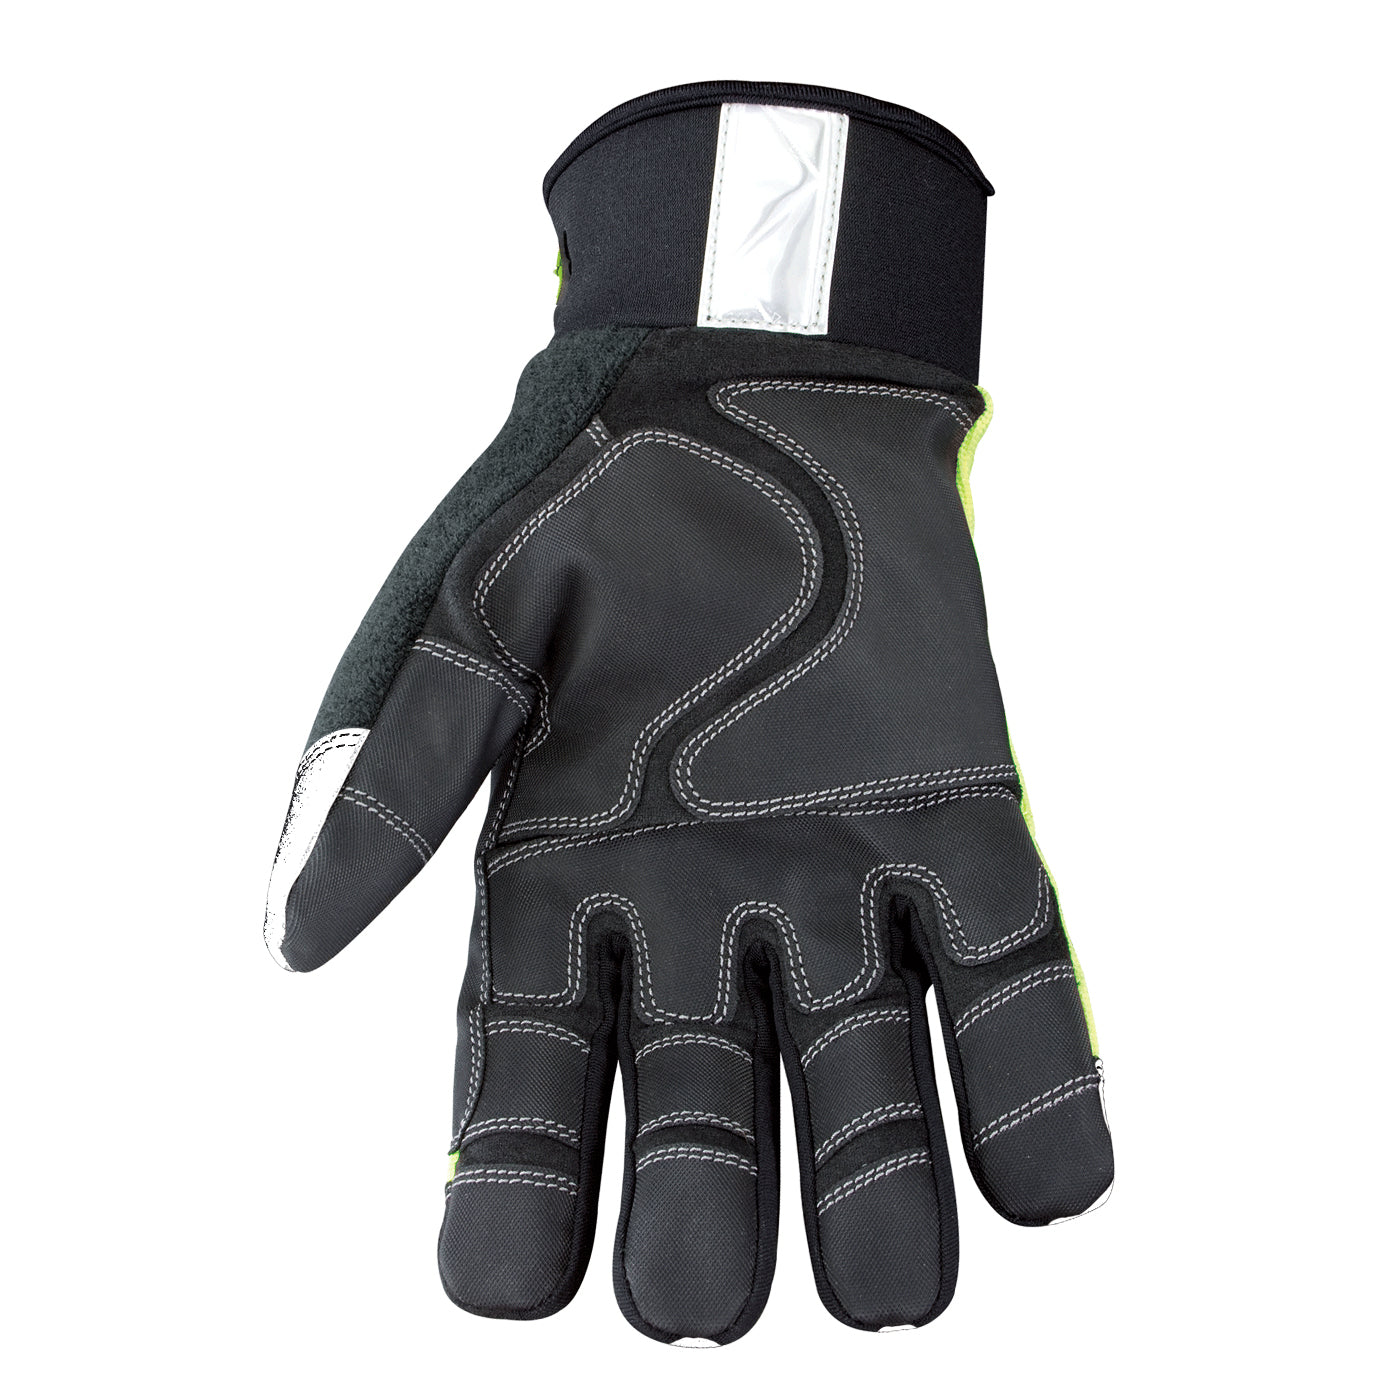 08-3710-10 Youngstown Safety Lime Winter Glove - Main image